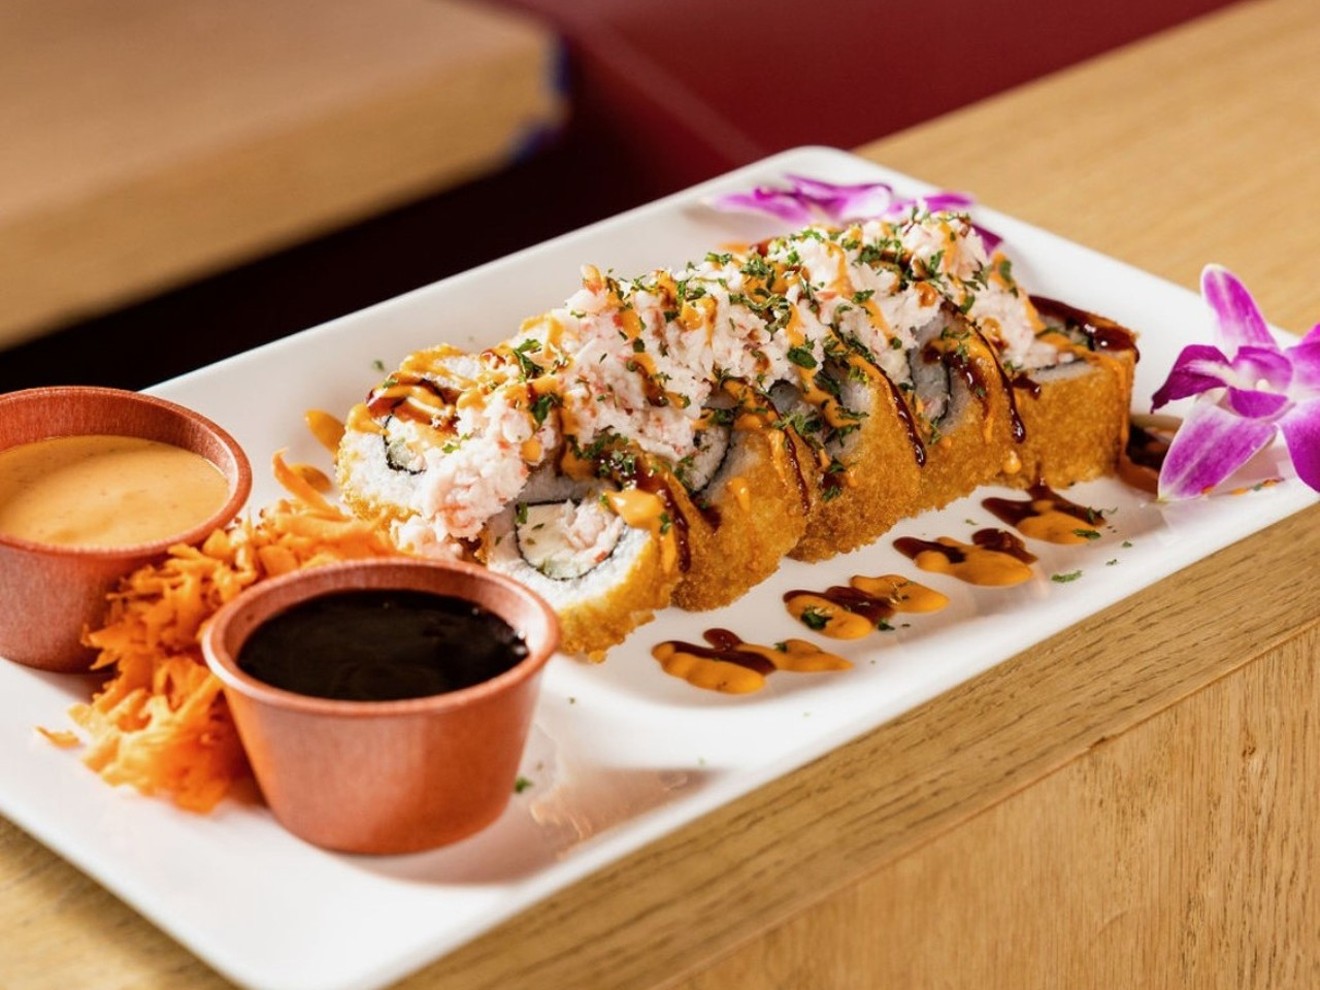 Blackbeard, a fried sushi roll stuffed with cream cheese, cucumber and imitation crab.